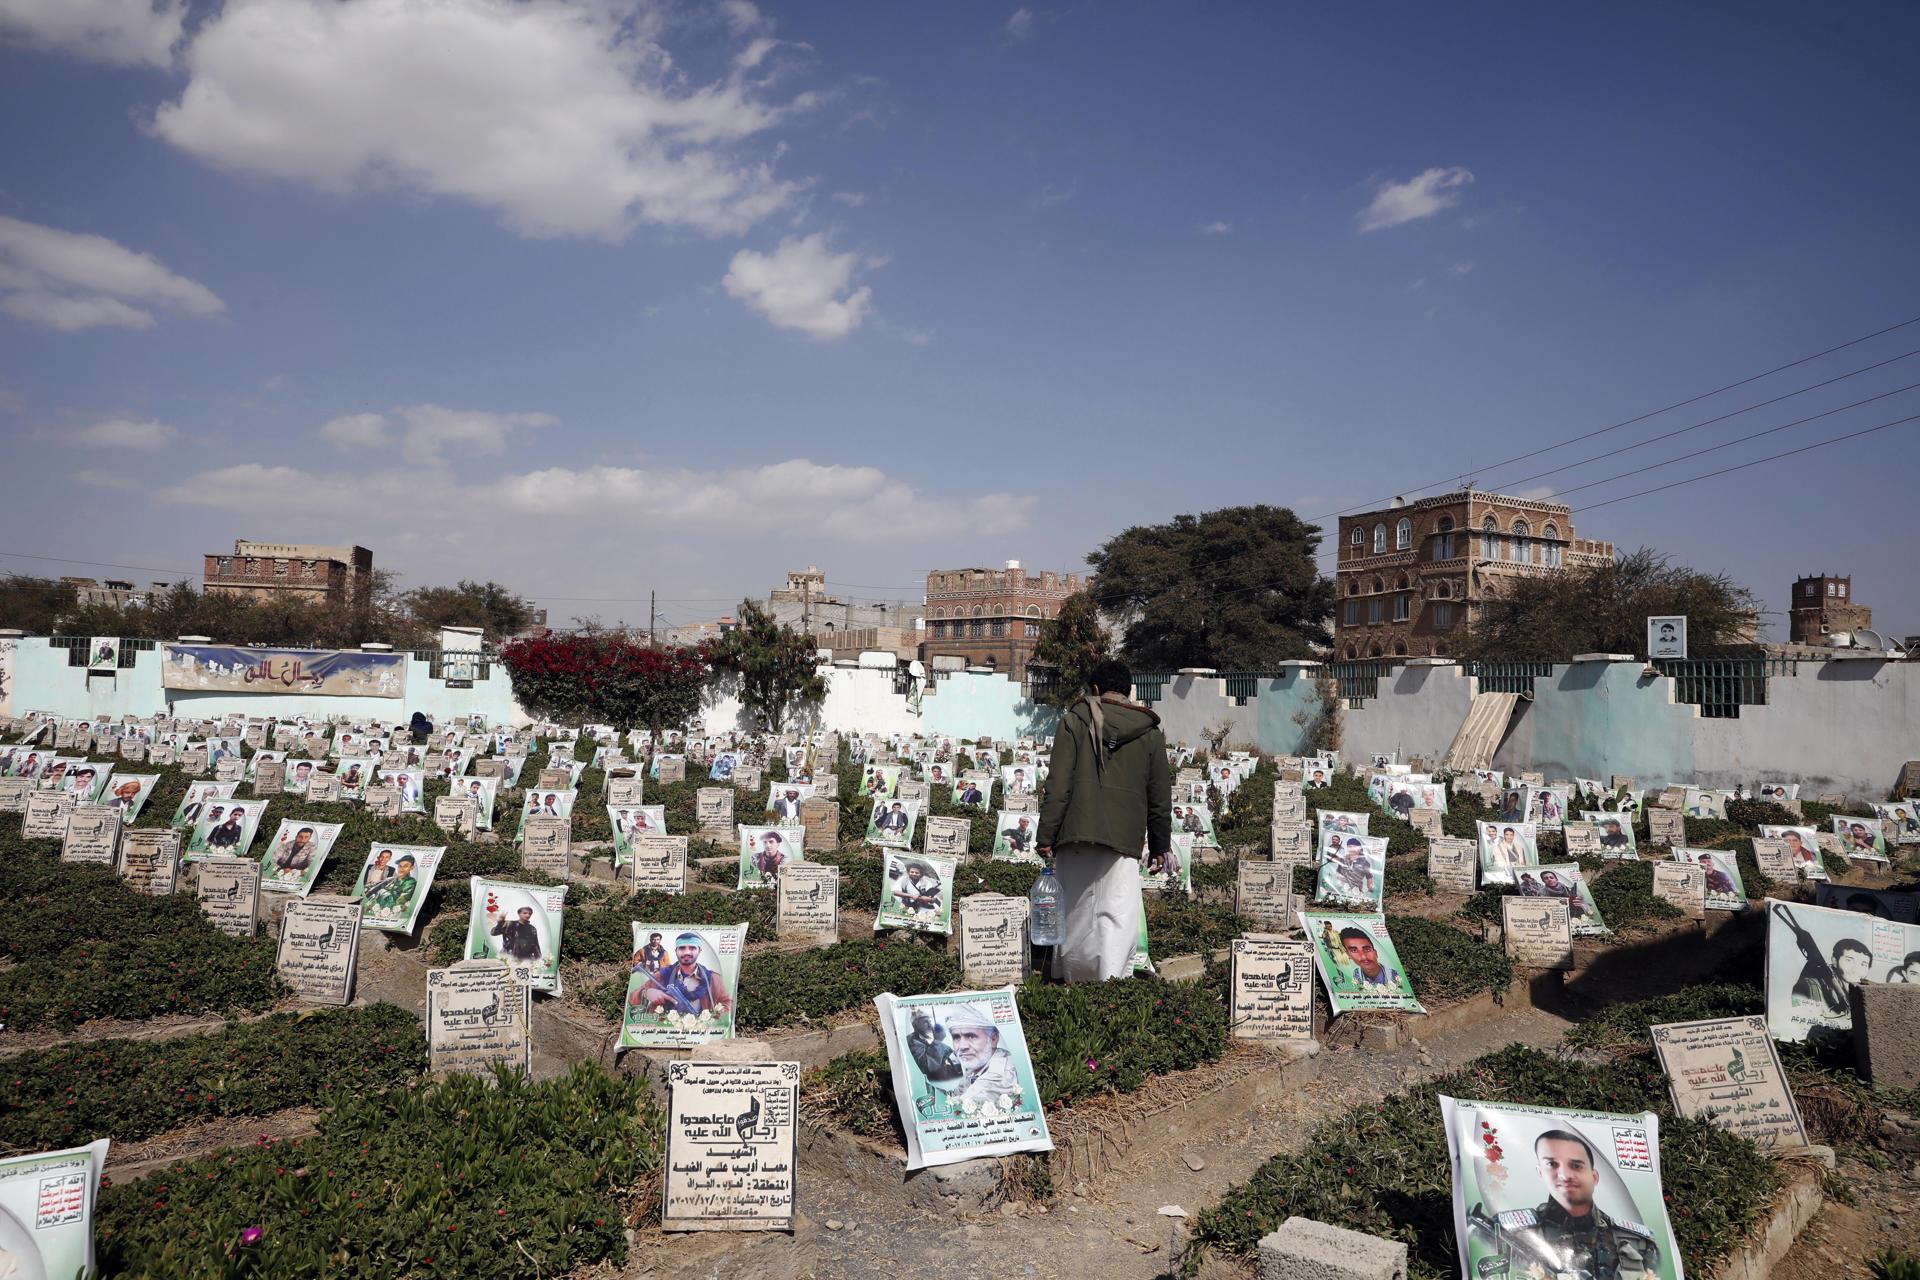 A Yemeni walks amongst portraits on the graves of those who were killed in the prolonged conflict, at a cemetery in Sana'a, Yemen, 12 December 2022. EFE-EPA/YAHYA ARHAB